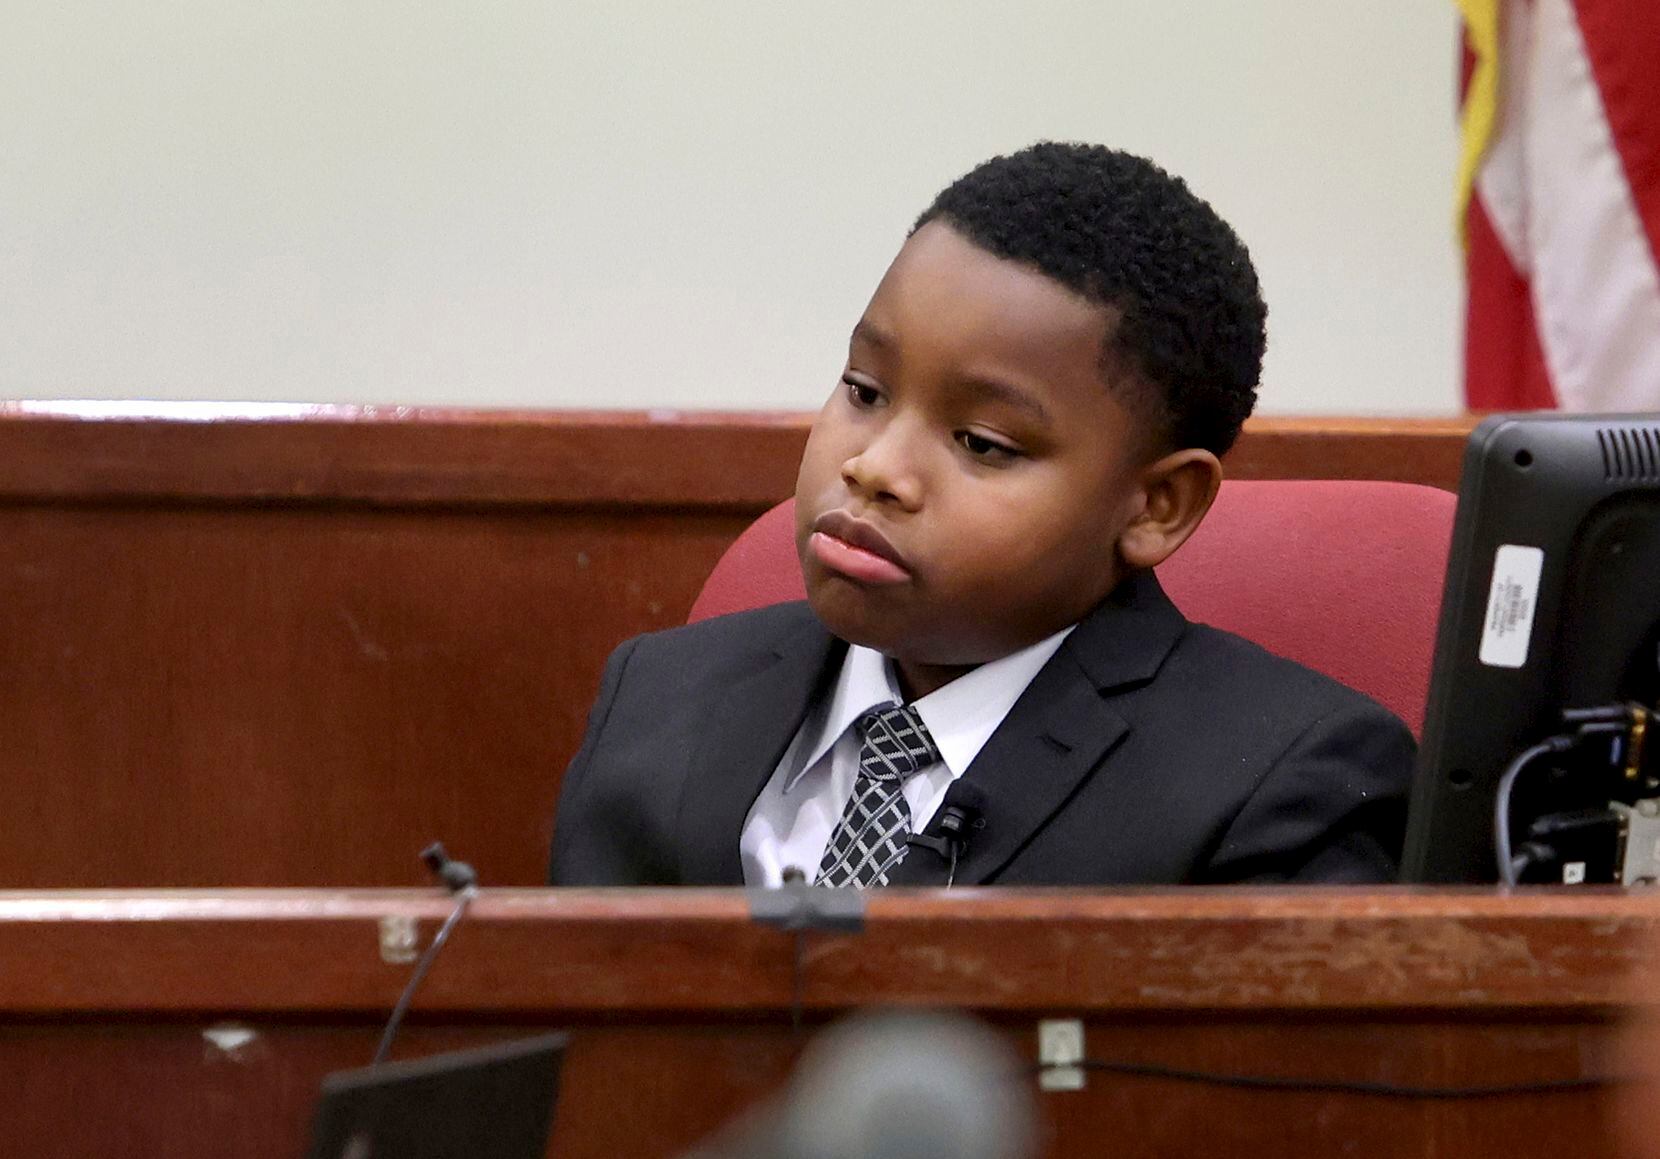 Zion Carr, 11, testifies during the murder trial of former Fort Worth Police Officer Aaron...